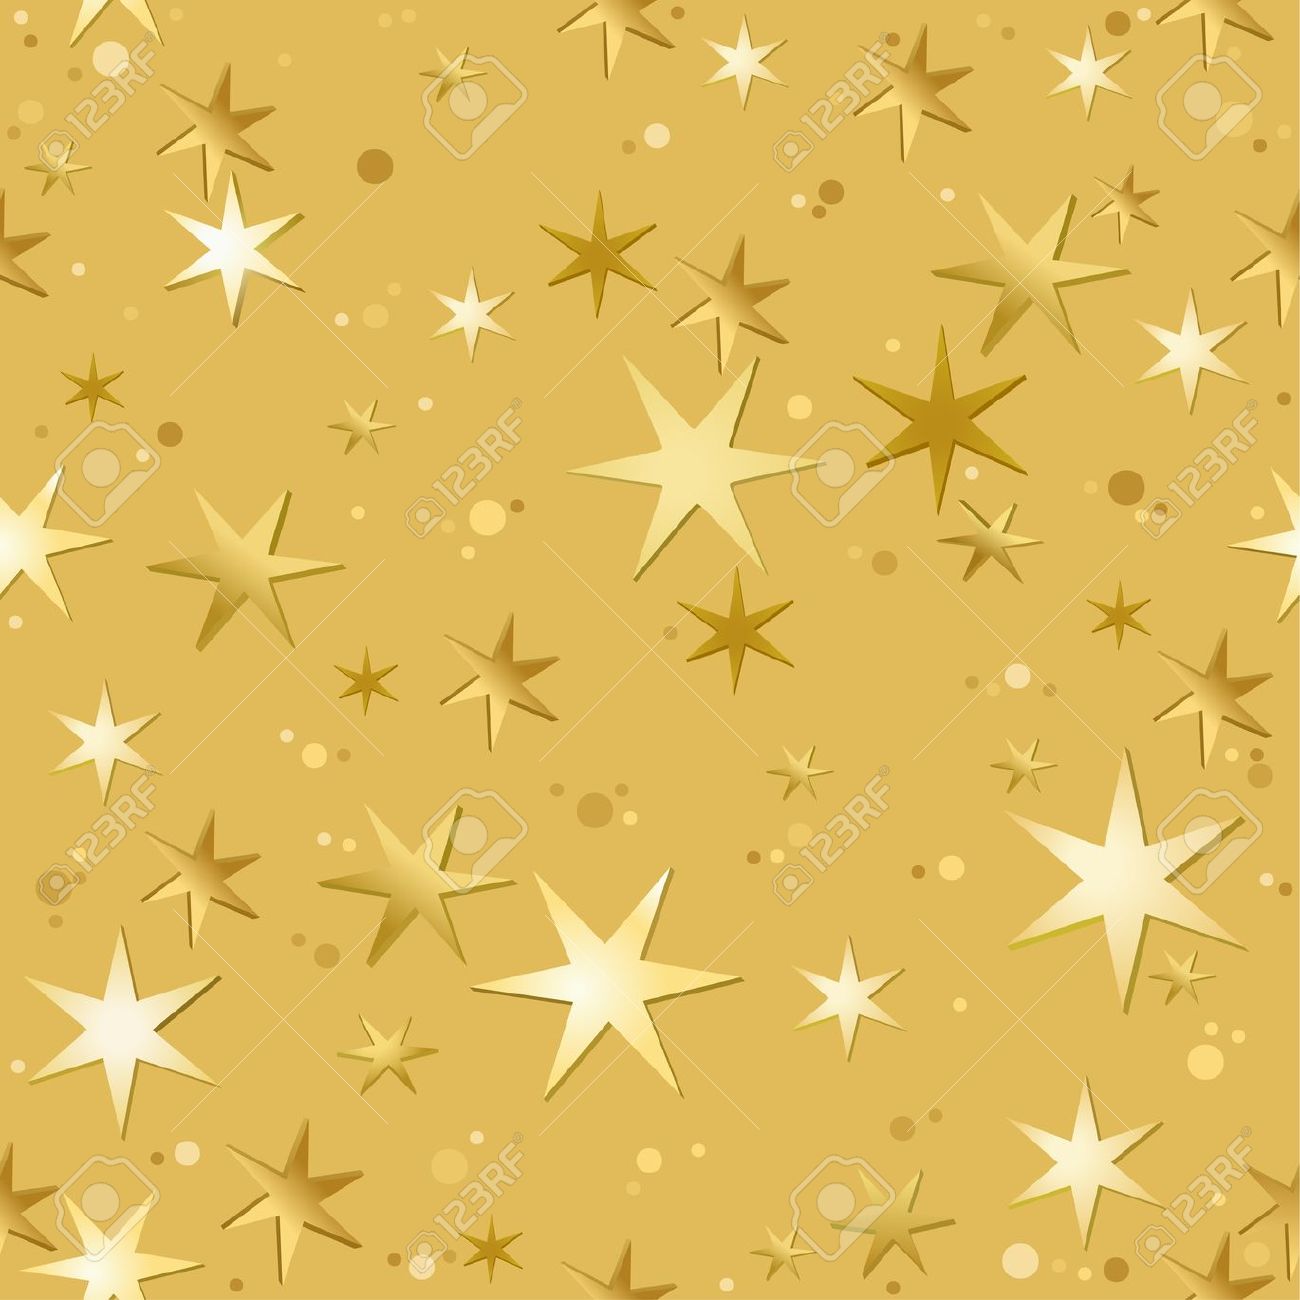 Free Star Background Cliparts, Download Free Star Background Cliparts